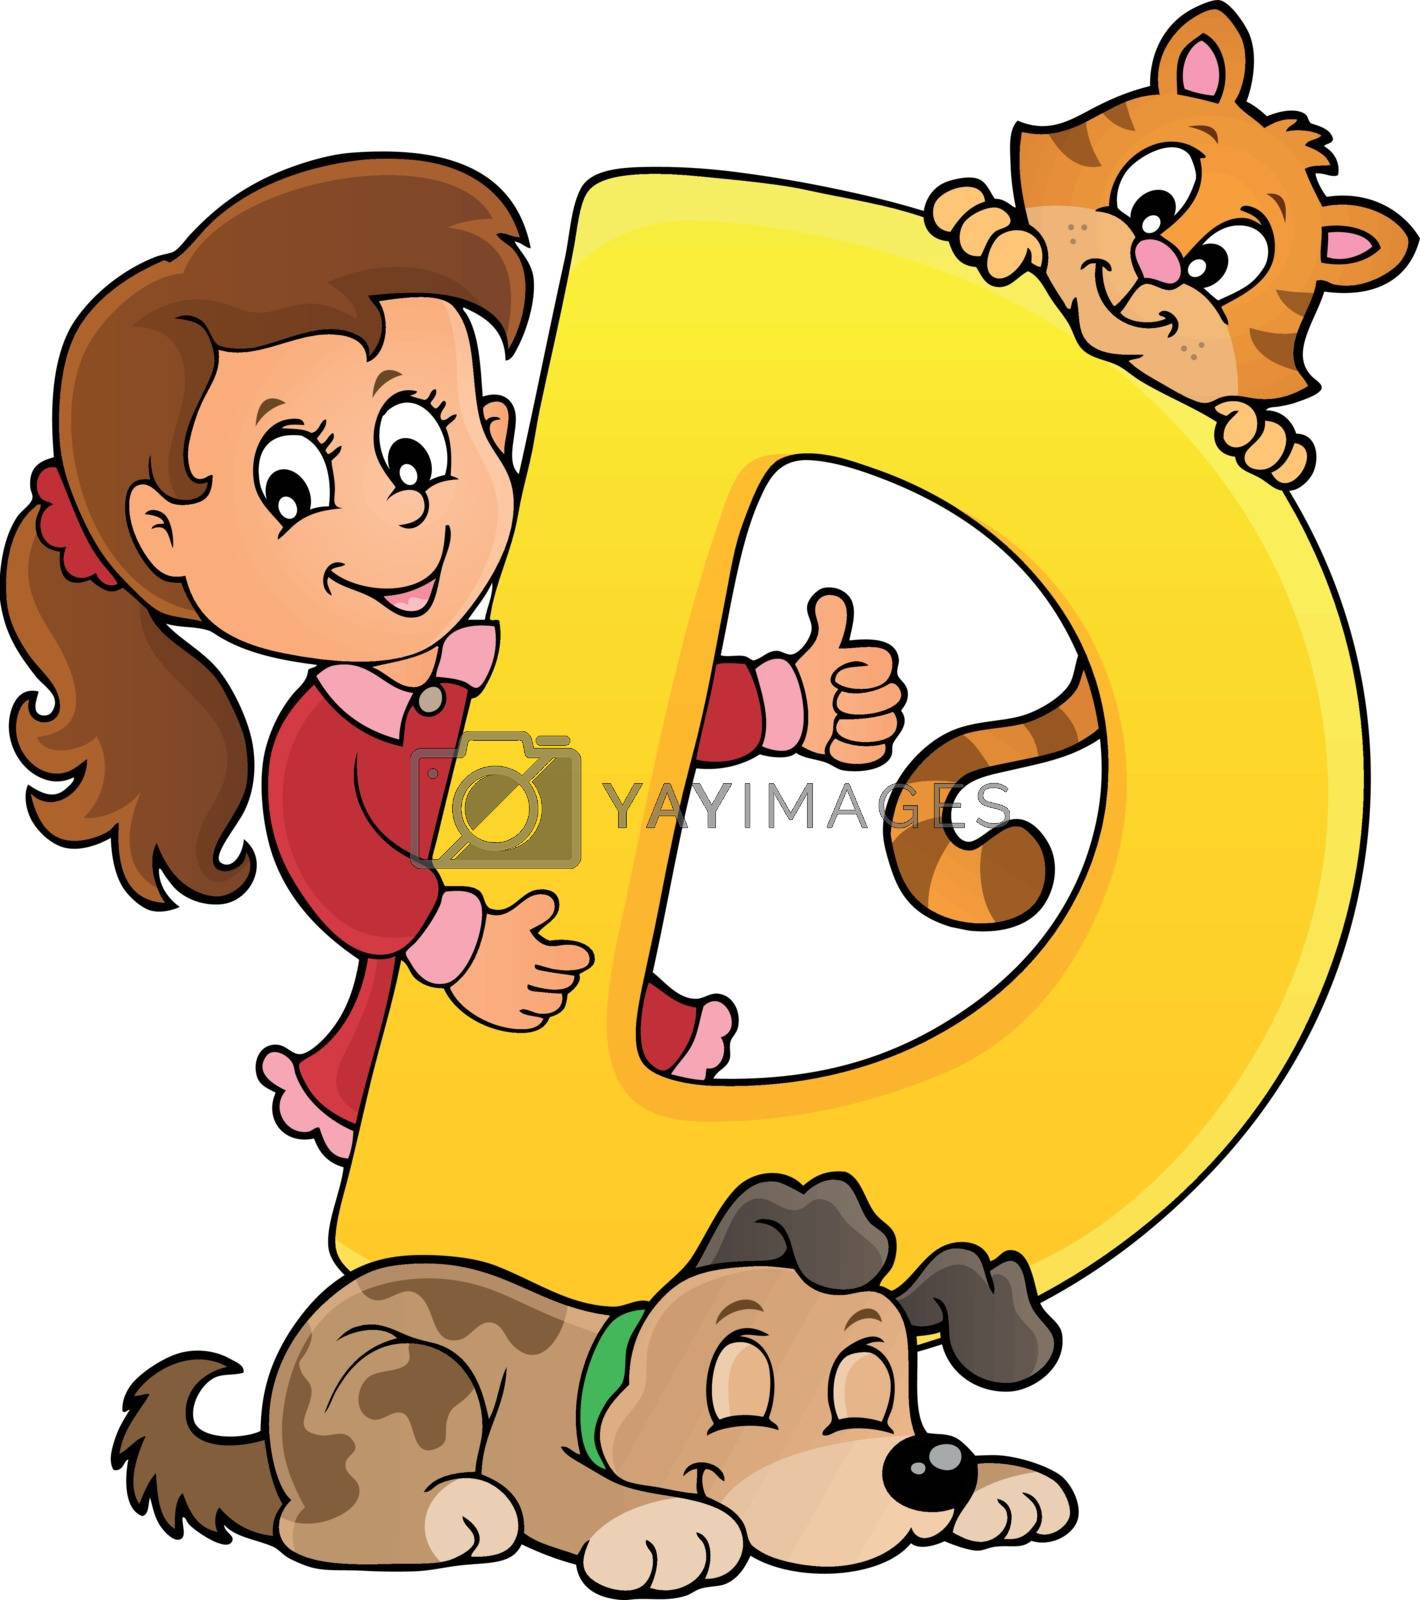 Girl and pets with letter D - eps10 vector illustration.